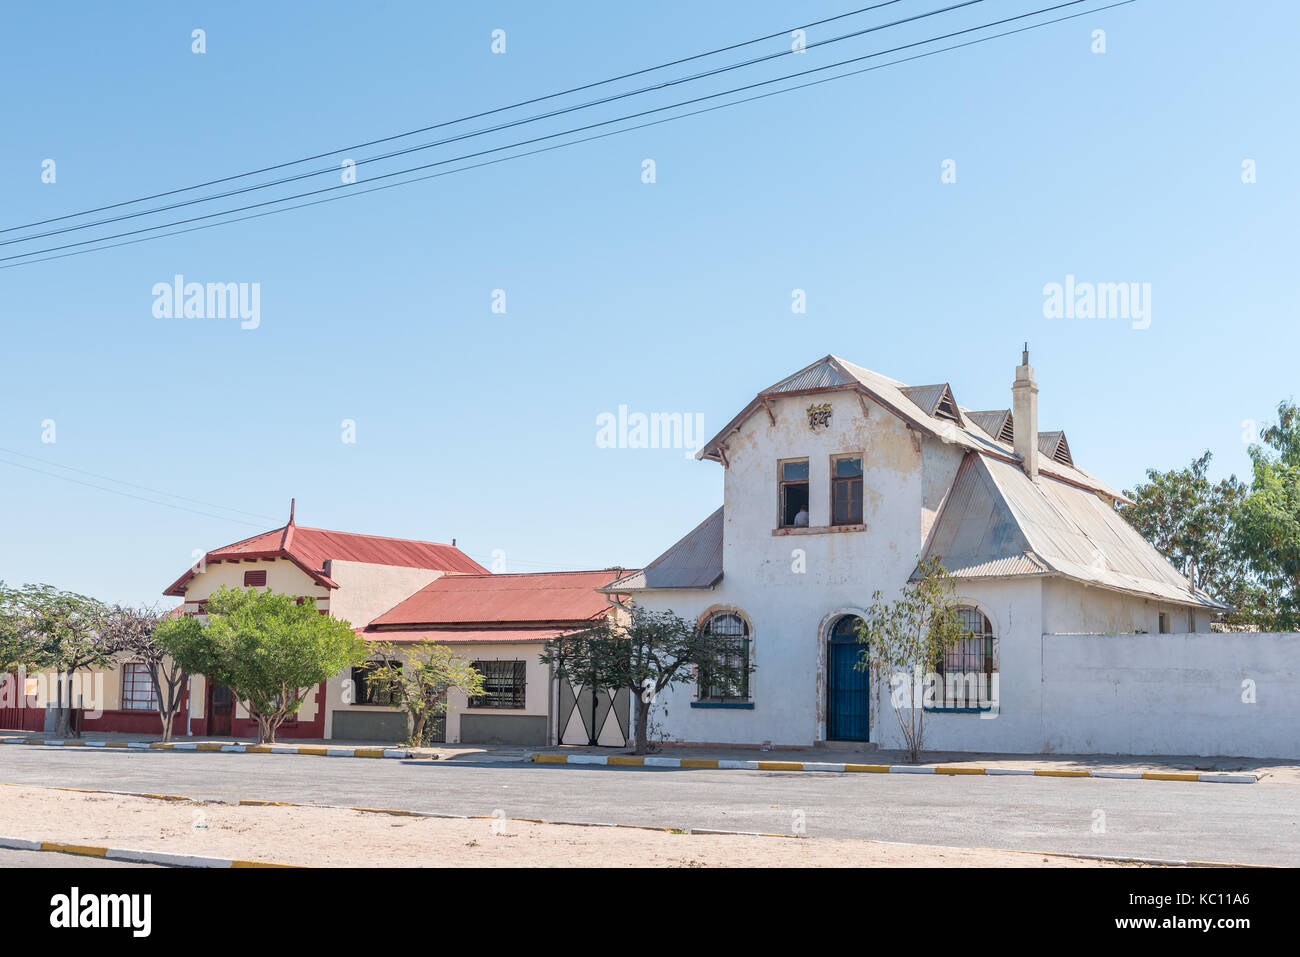 USAKOS, NAMIBIA - JULY 3, 2017: A street scene with historic houses in Usakos, a small town in the Erongo Region of Namibia Stock Photo